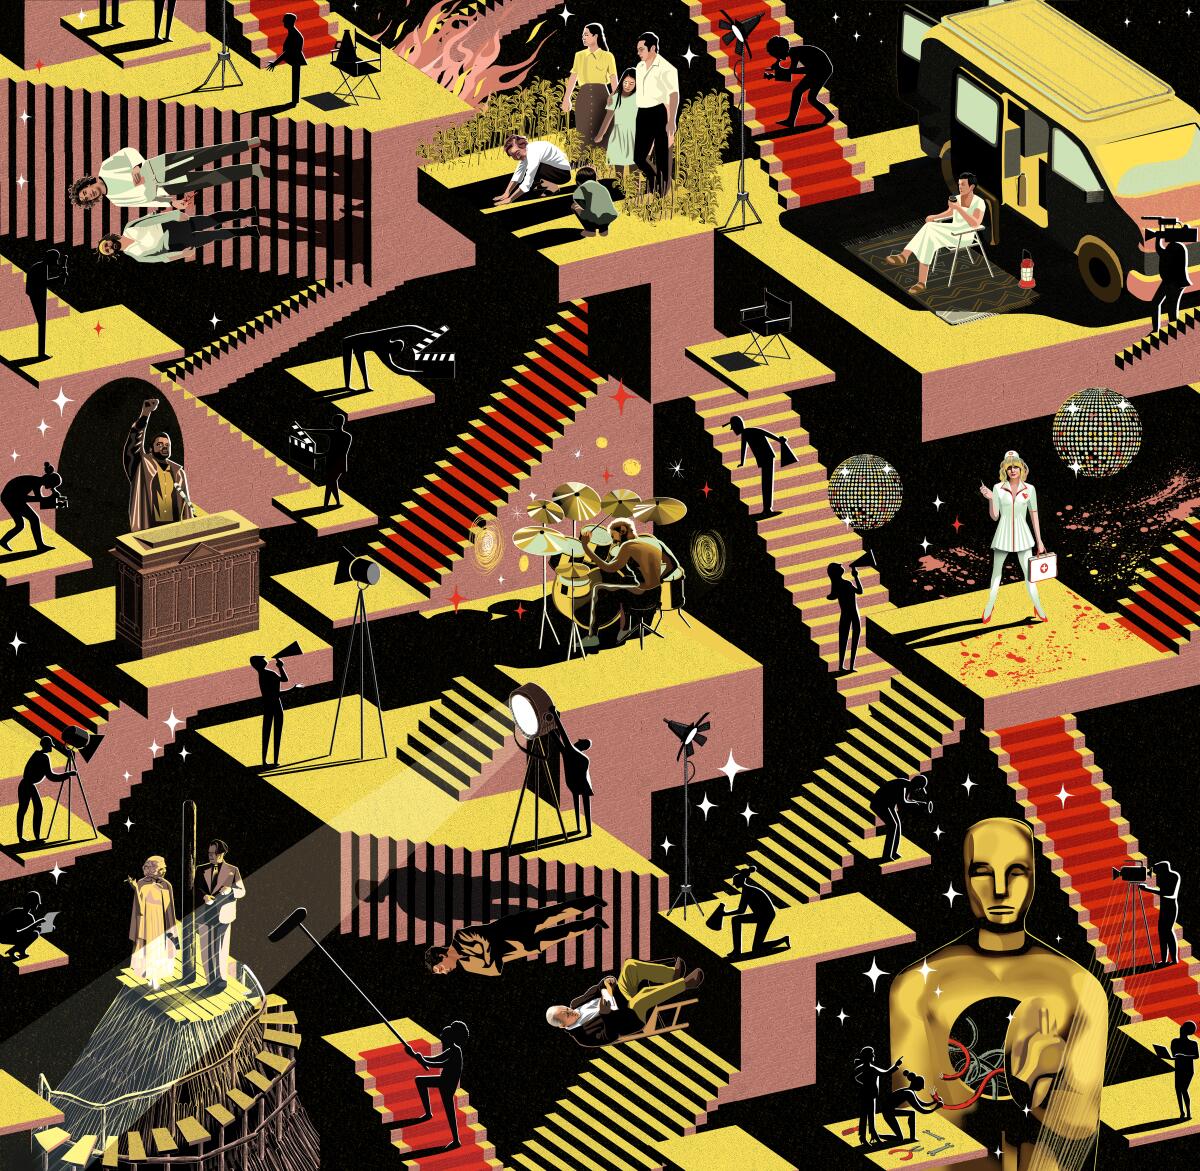 An illustration shows staircases, some with red carpets, an Oscar statuette, presenters, lights, mikes.